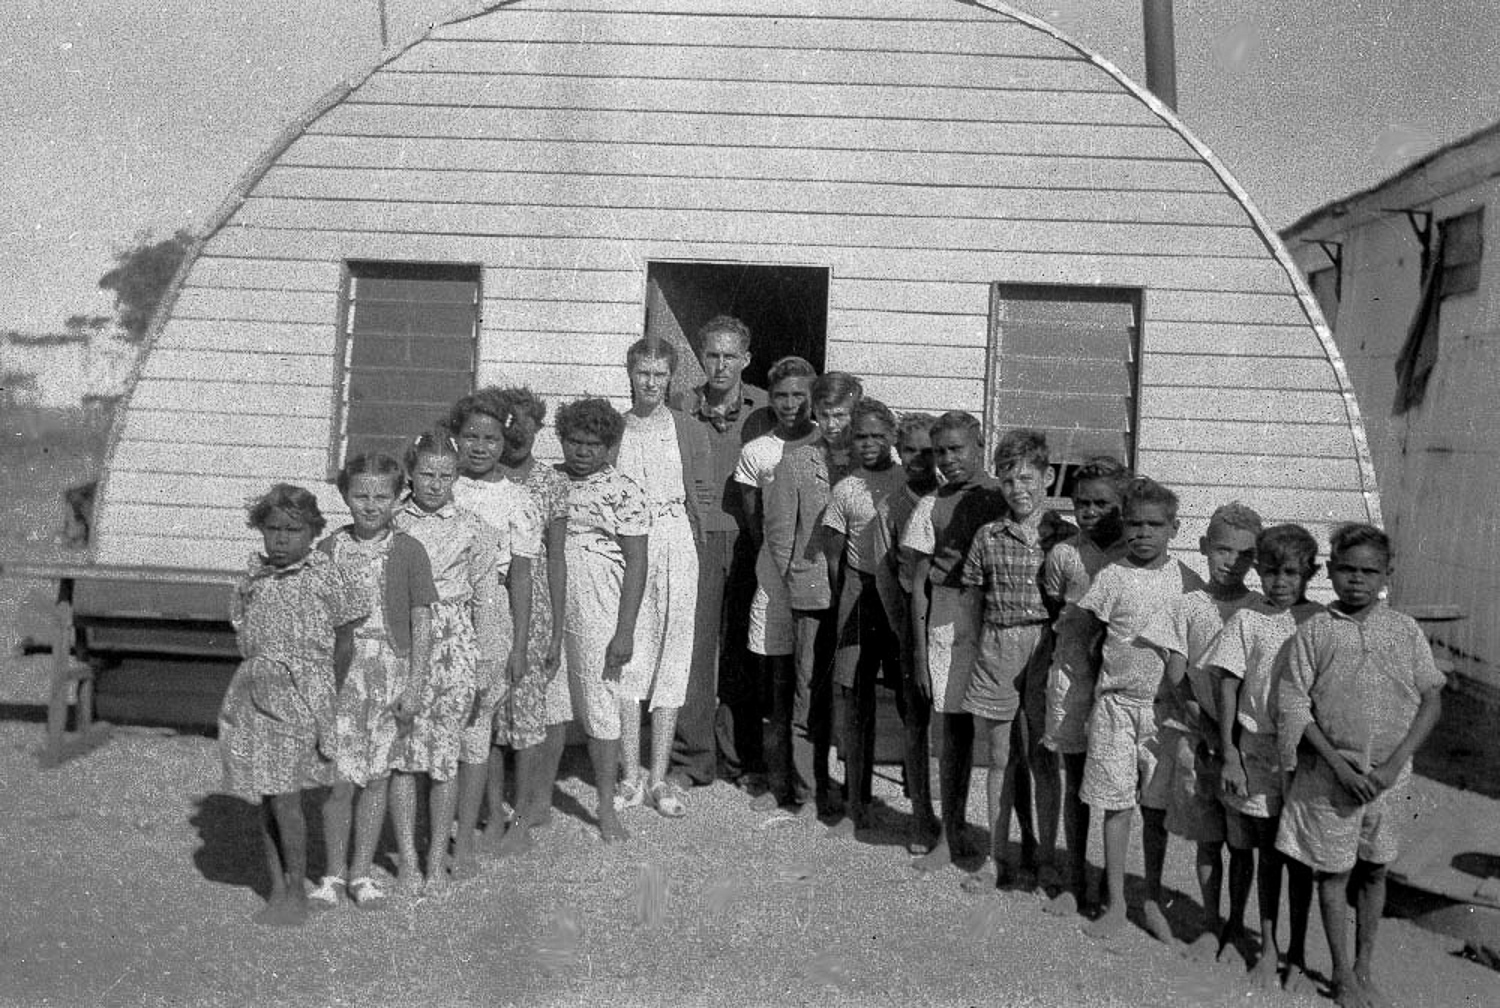 Part of the assimilation policy meant taking Anangu children from their parents to send them to school. Students would be taught in English and learn a western curriculum.